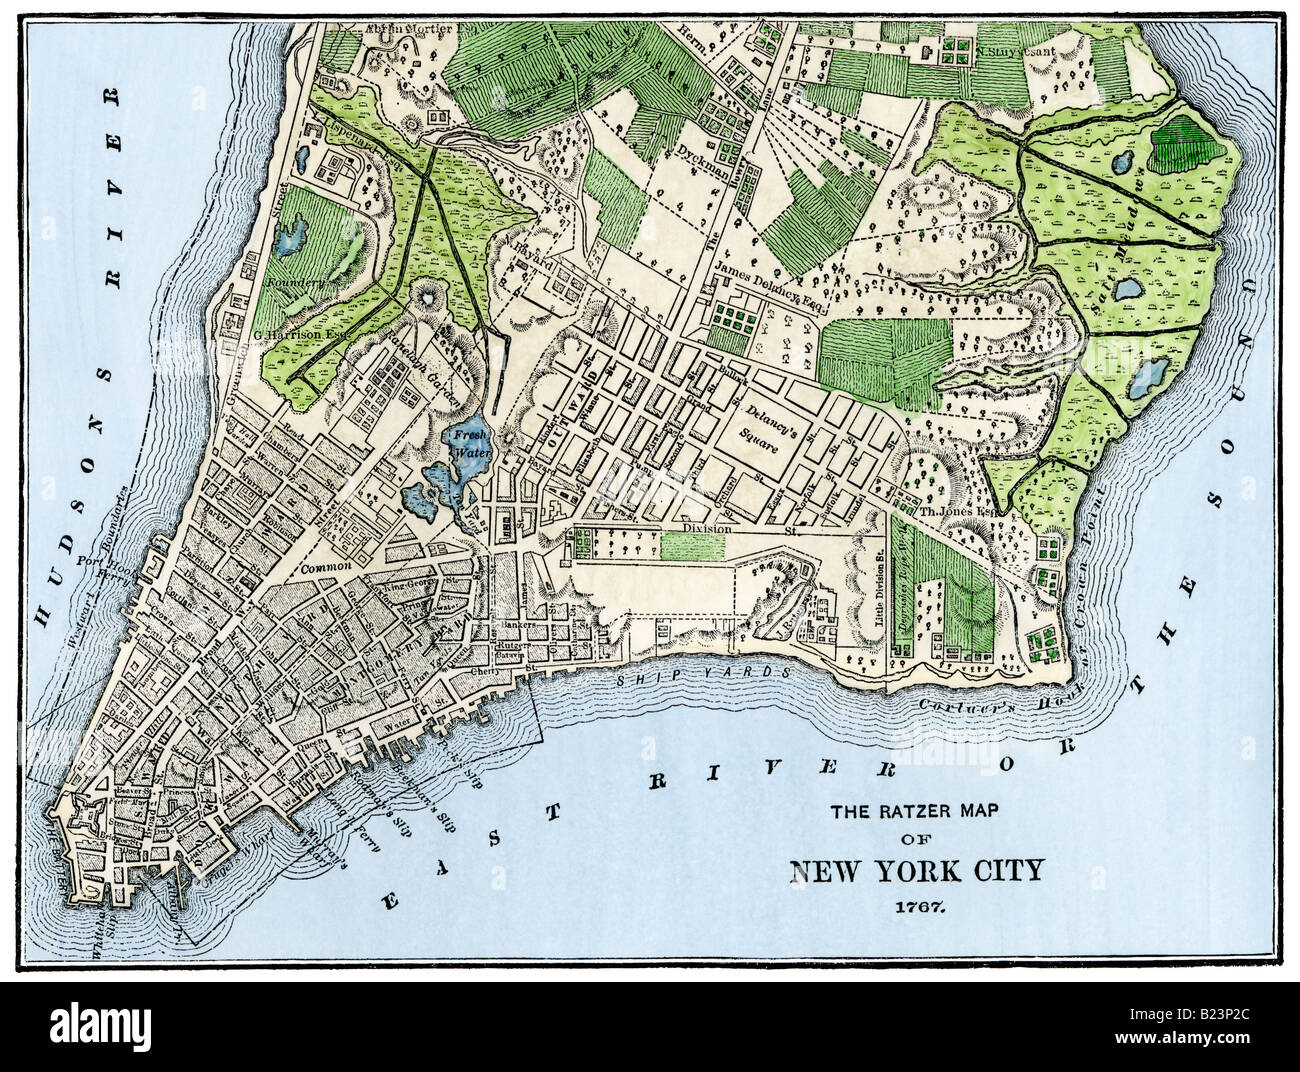 Ratzer map of New York City 1767. Hand-colored woodcut Stock Photo